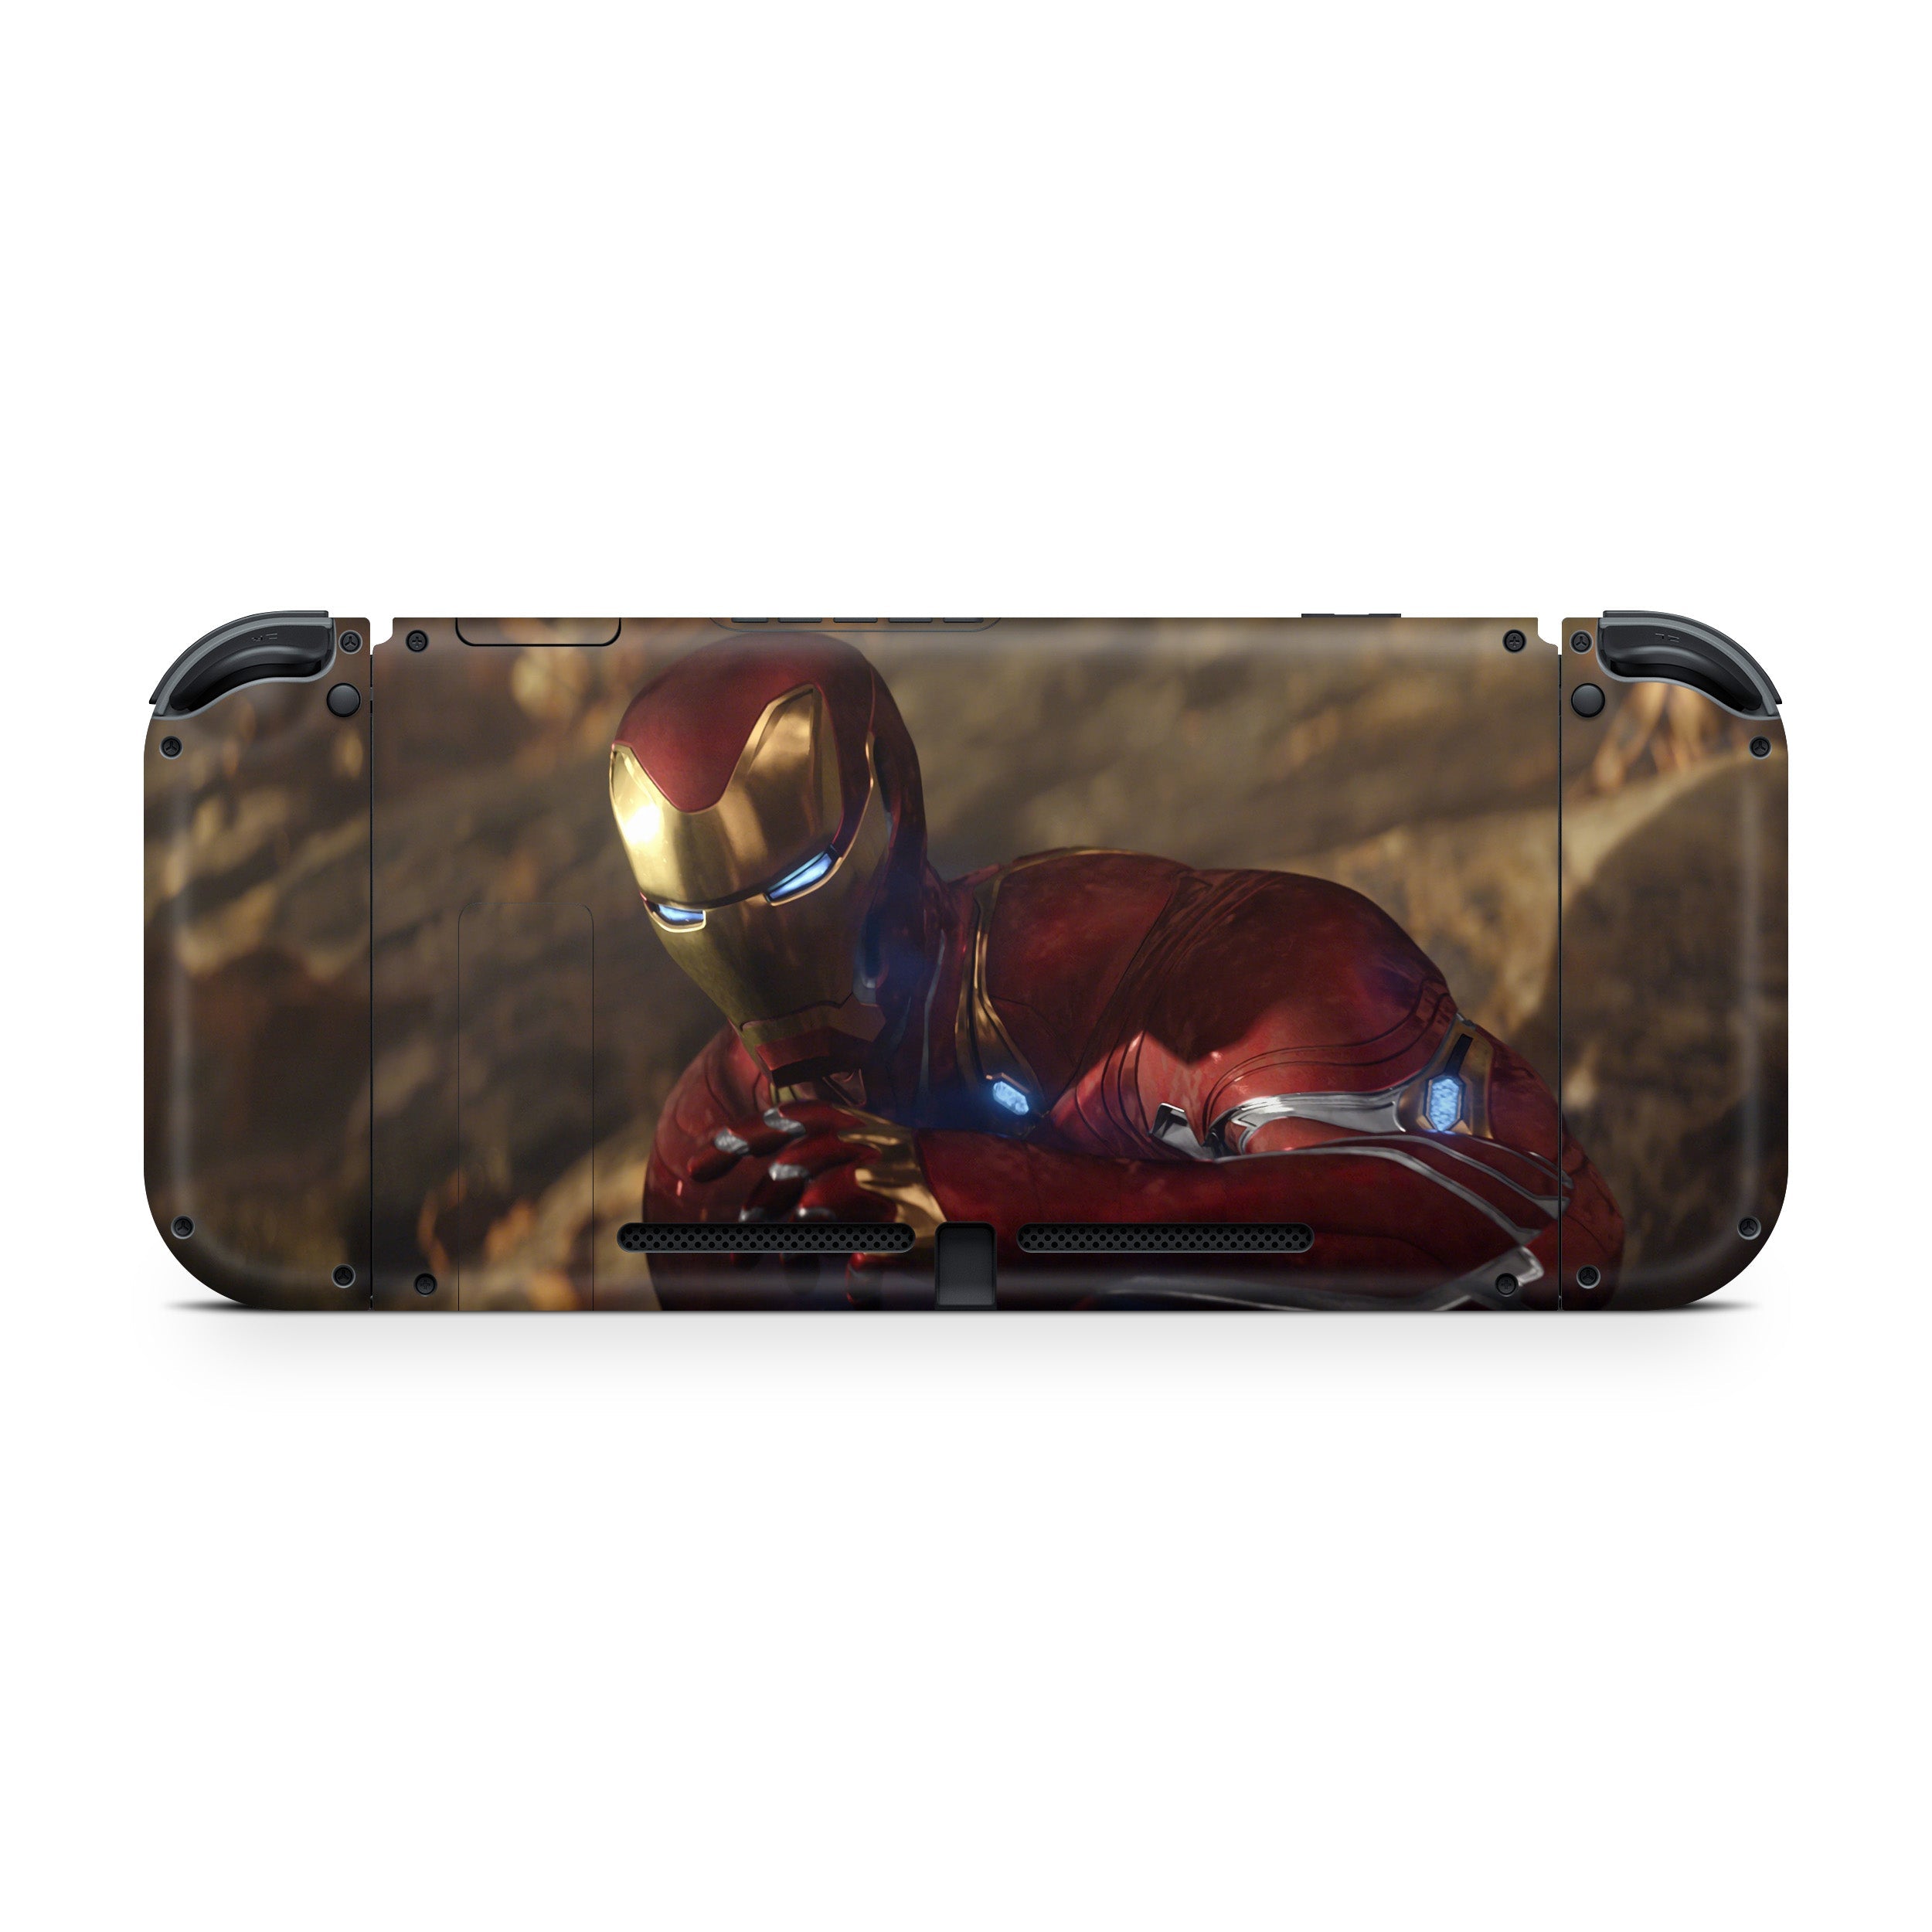 A video game skin featuring a Marvel Iron Man design for the Nintendo Switch.